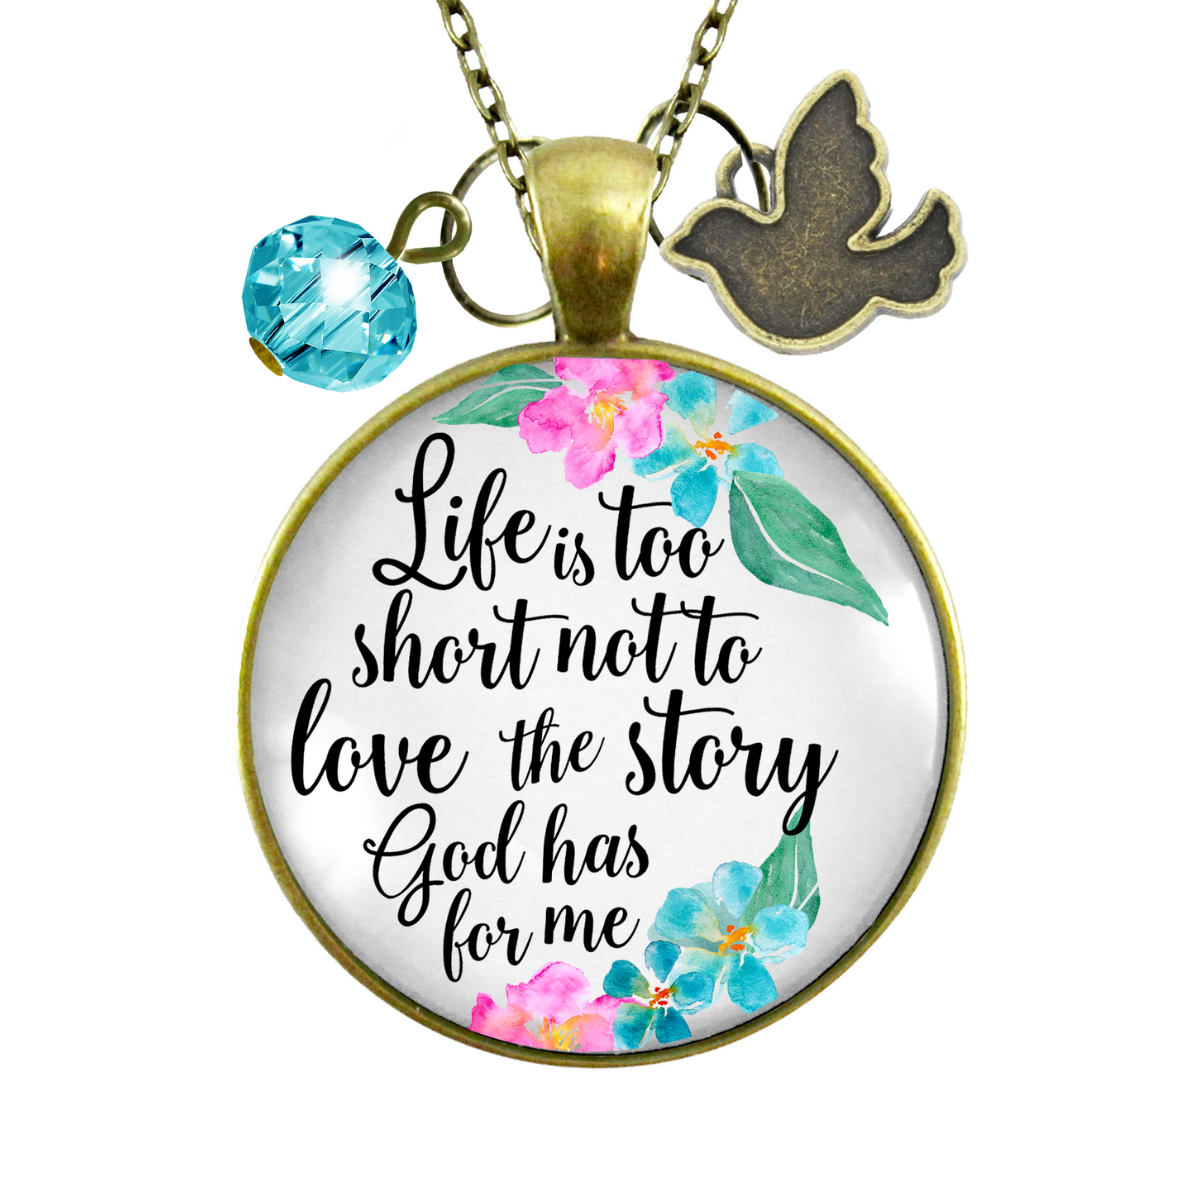 Gutsy Goodness Faith Necklace Life is Too Short Not To Love The Story God Has For Me - Gutsy Goodness;Faith Necklace Life Is Too Short Not To Love The Story God Has For Me - Gutsy Goodness Handmade Jewelry Gifts